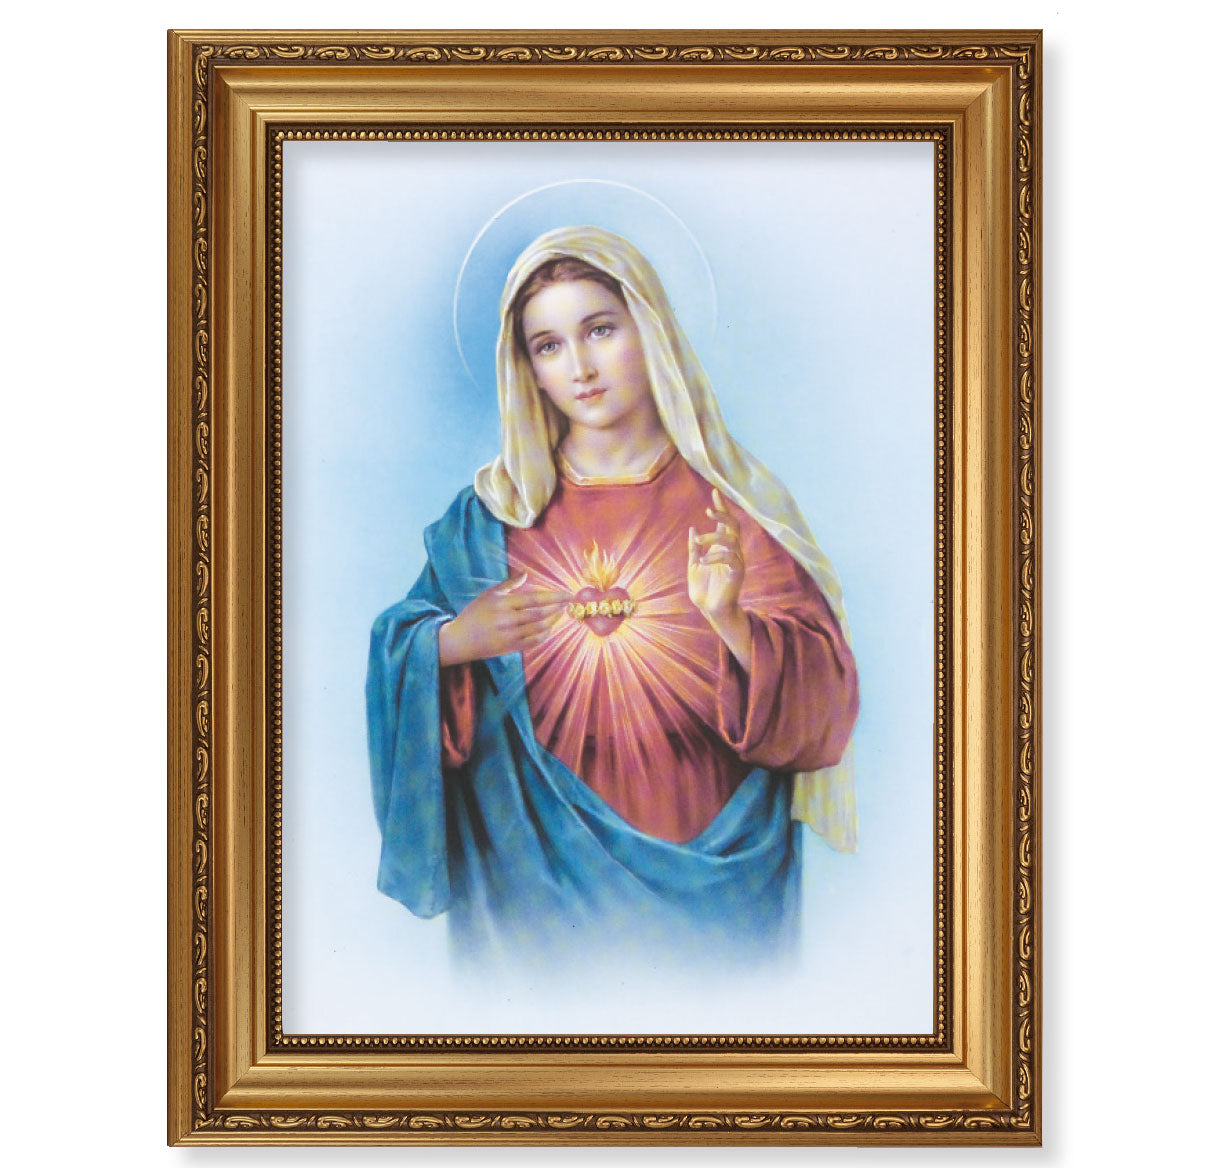 Immaculate Heart of Mary Antique Picture Framed Wall Art Decor, Extra Large, Antique Gold-Leaf Frame with Acanthus-Leaf Trim and Beaded Lip